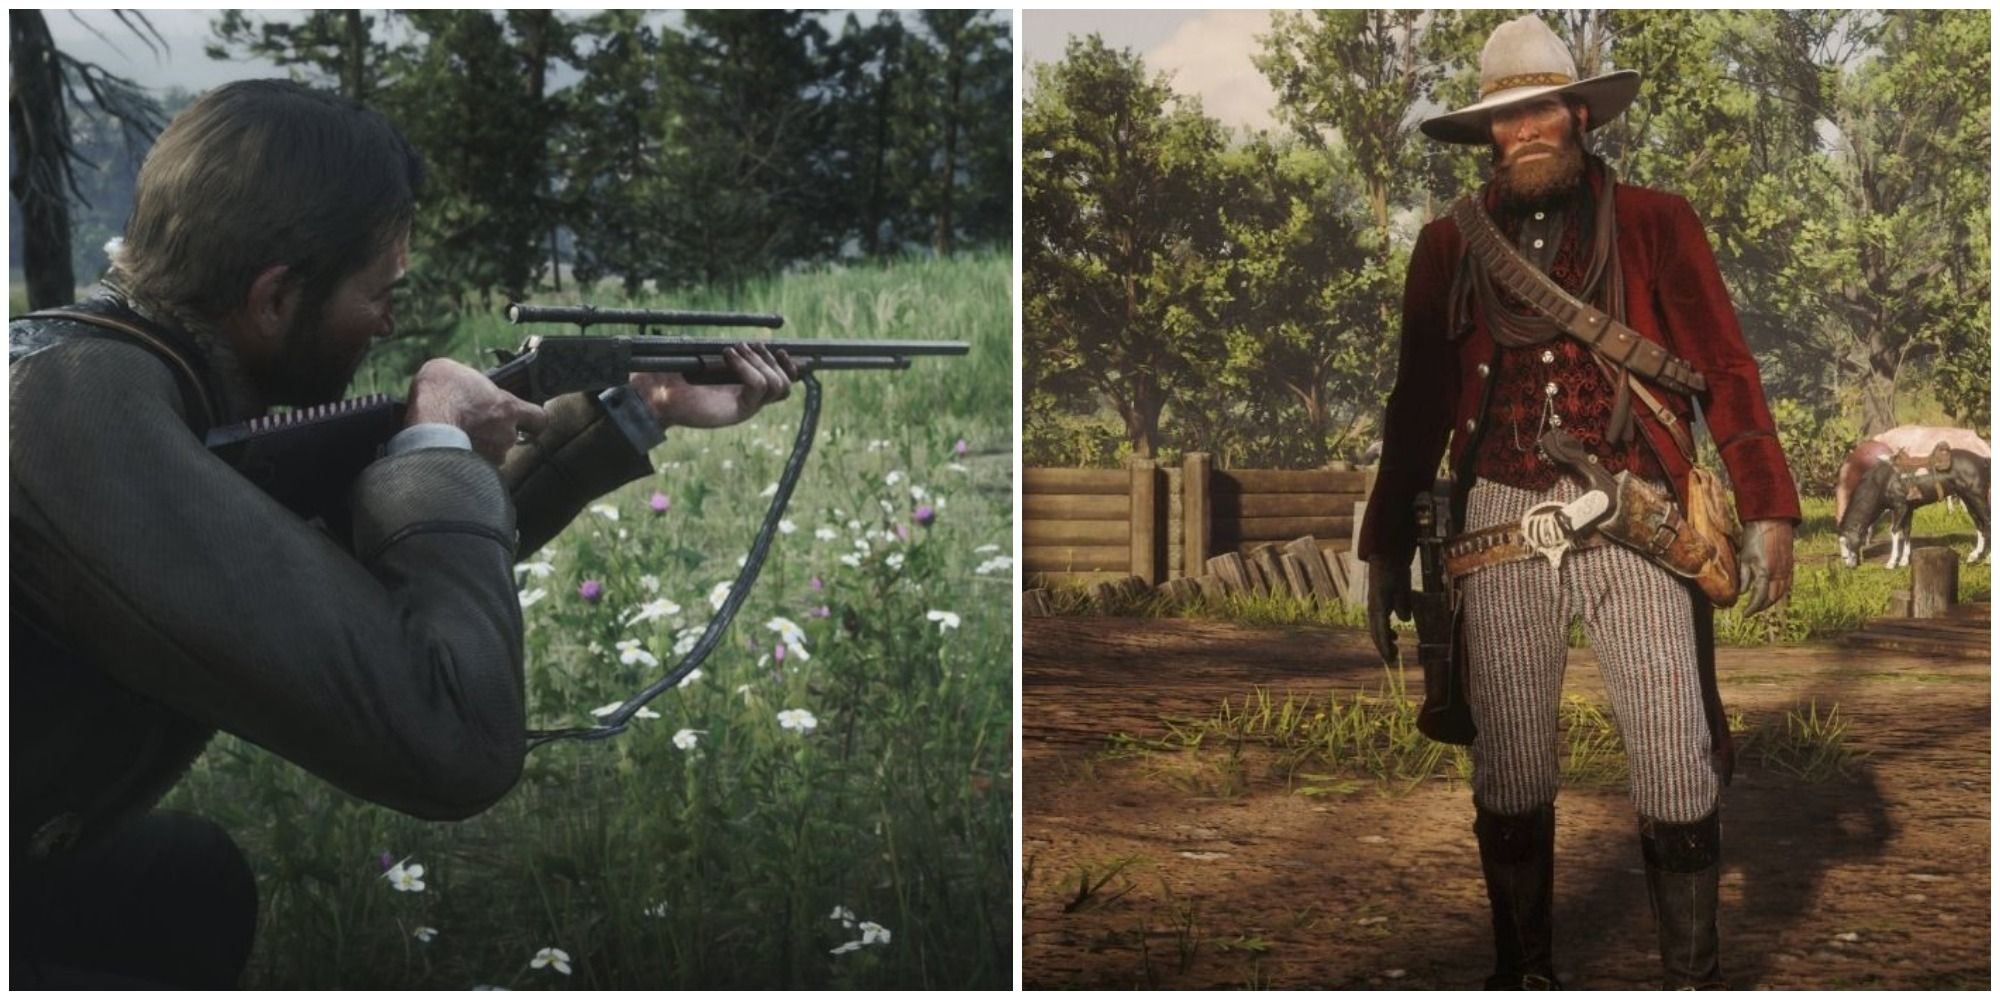 How To Get The Legend Of The East Outfit In RDR2